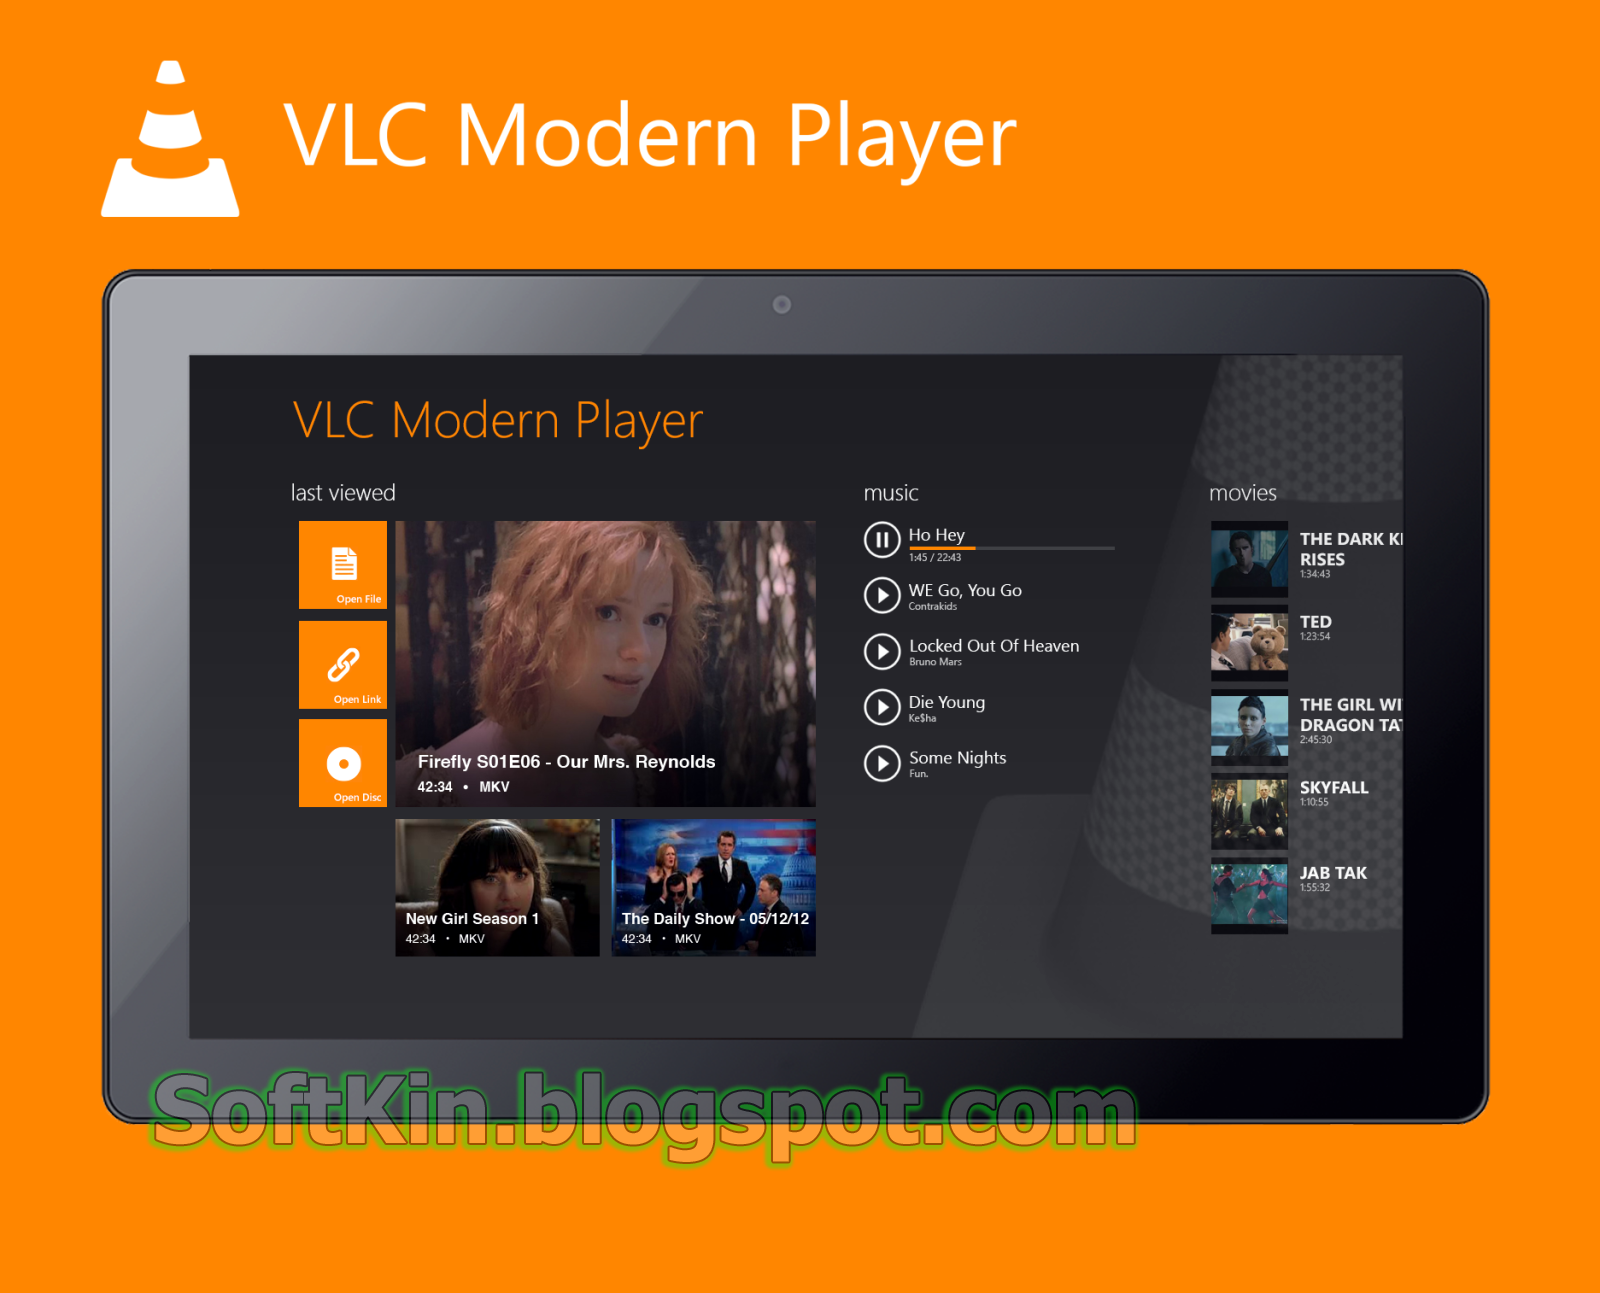 vlc media player for pc windows 7 free download